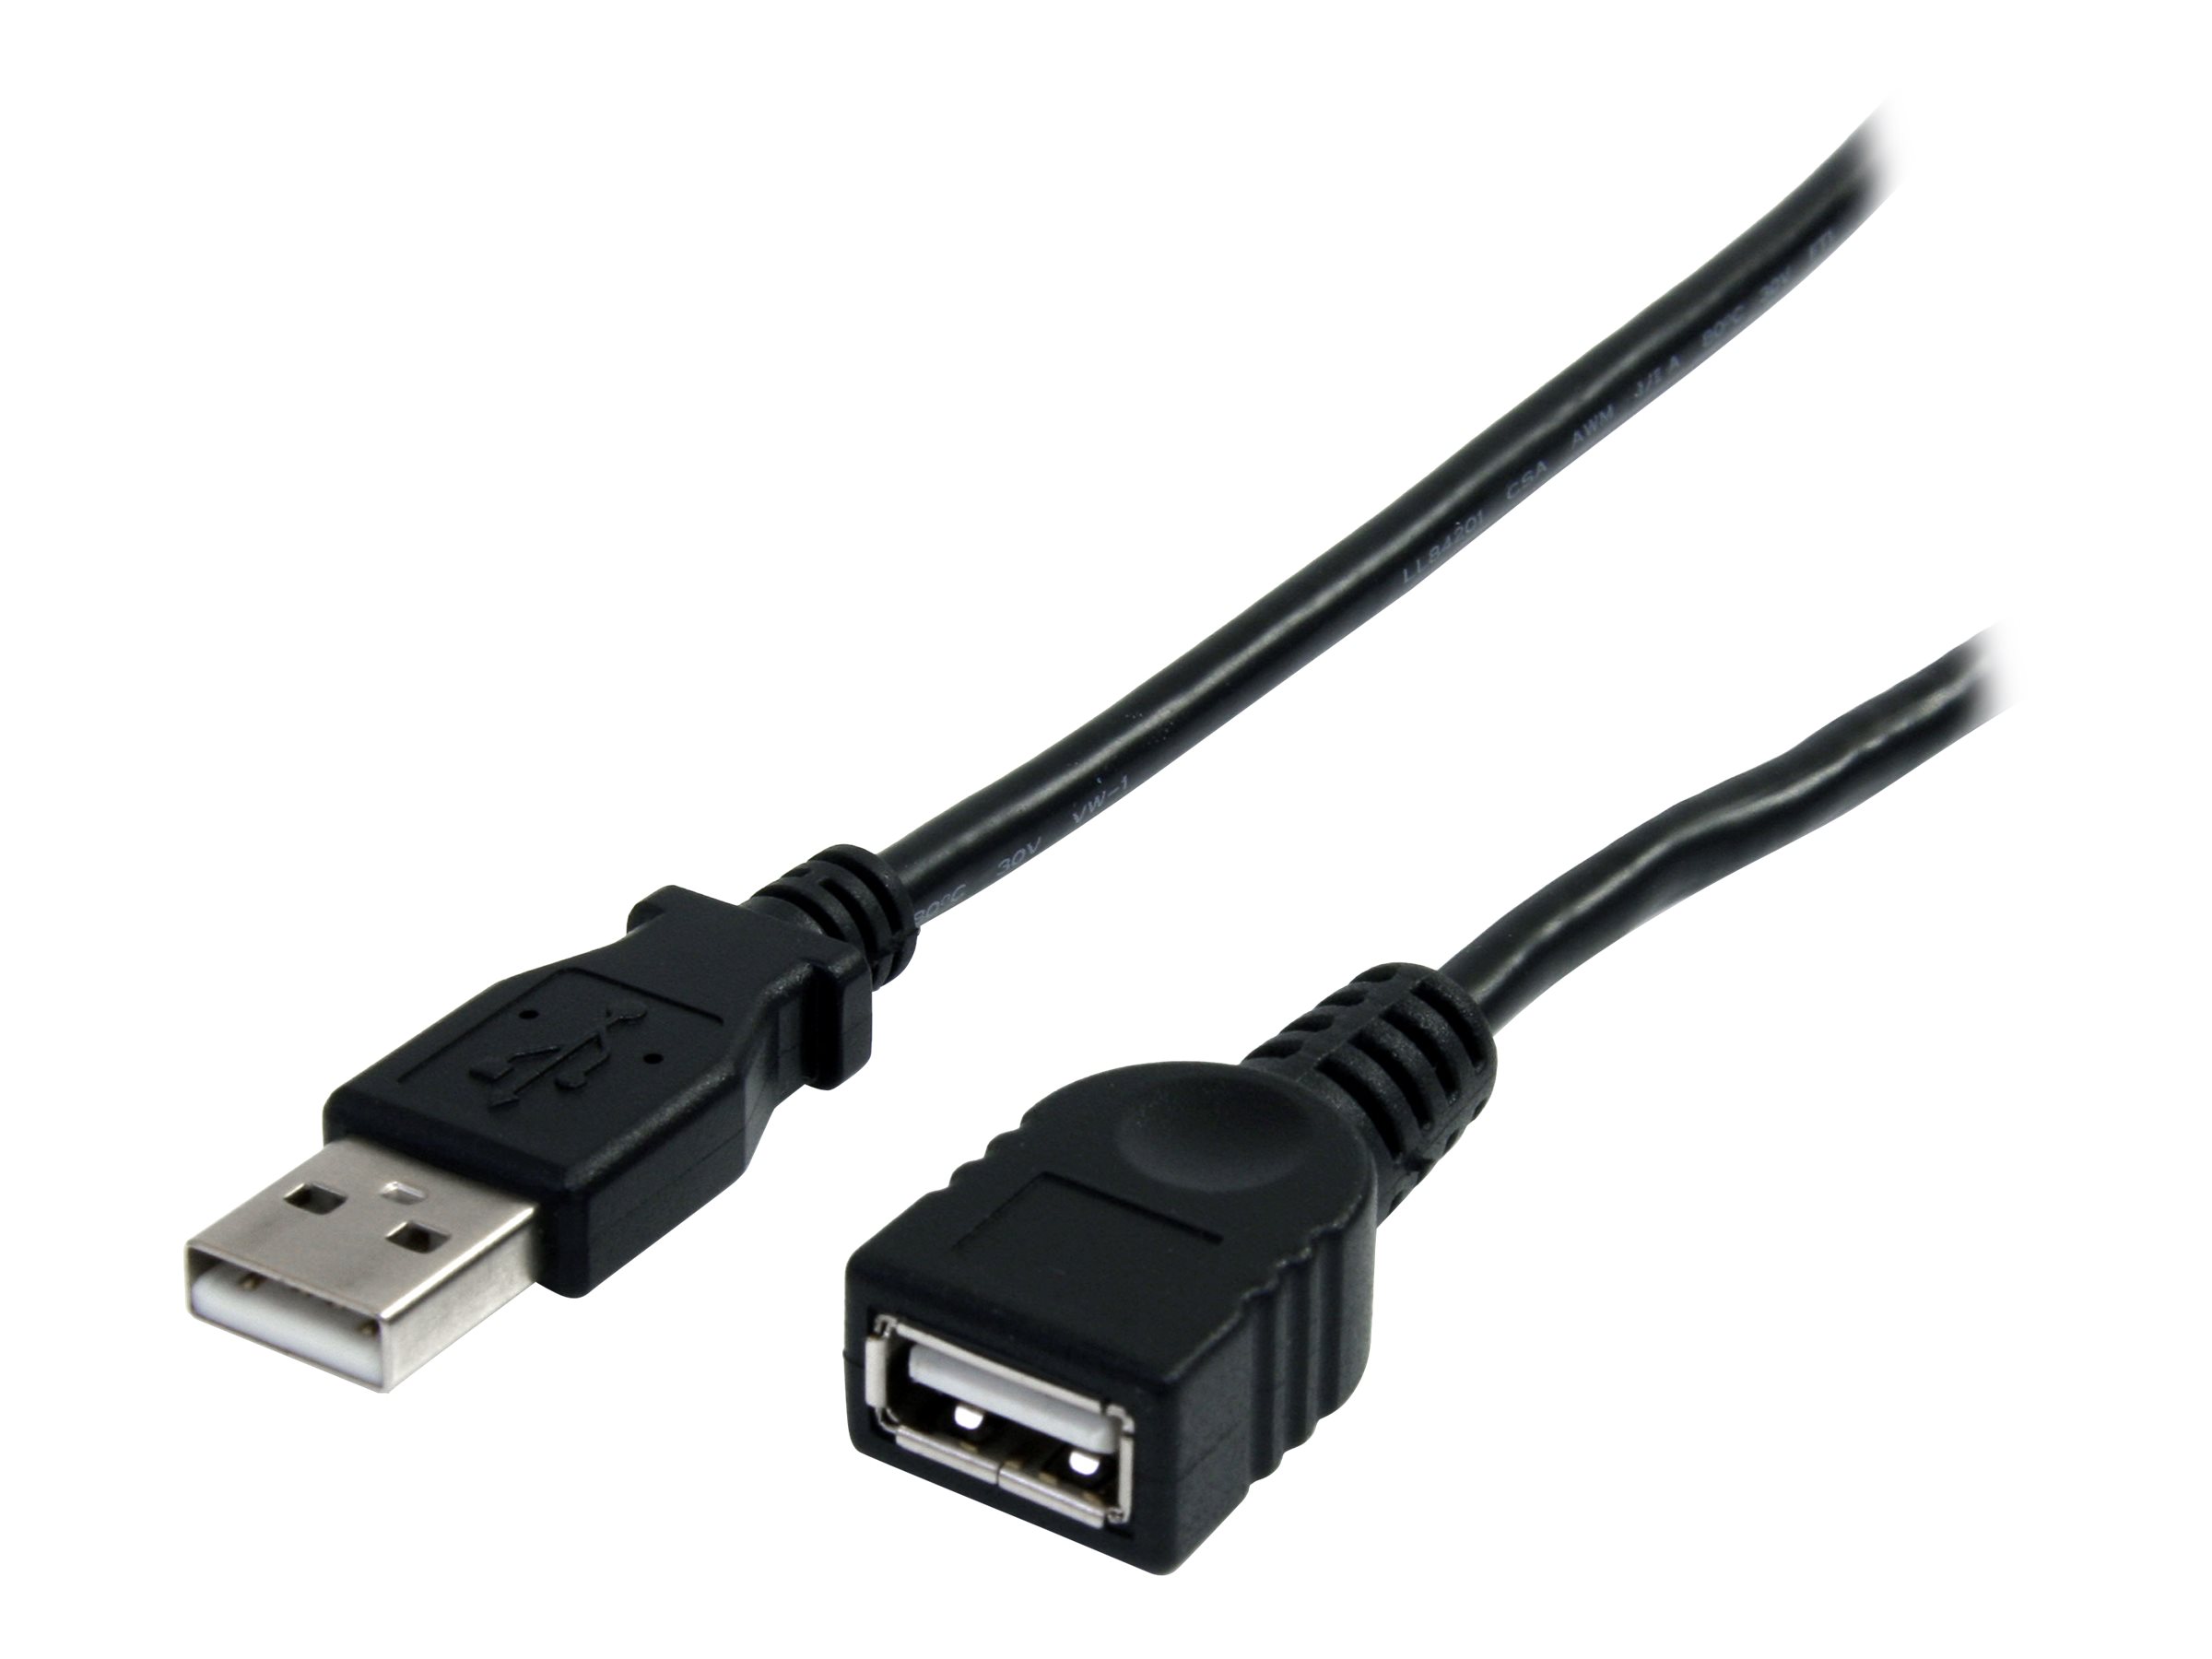 StarTech.com 10 ft Black USB 2.0 Extension Cable A to A